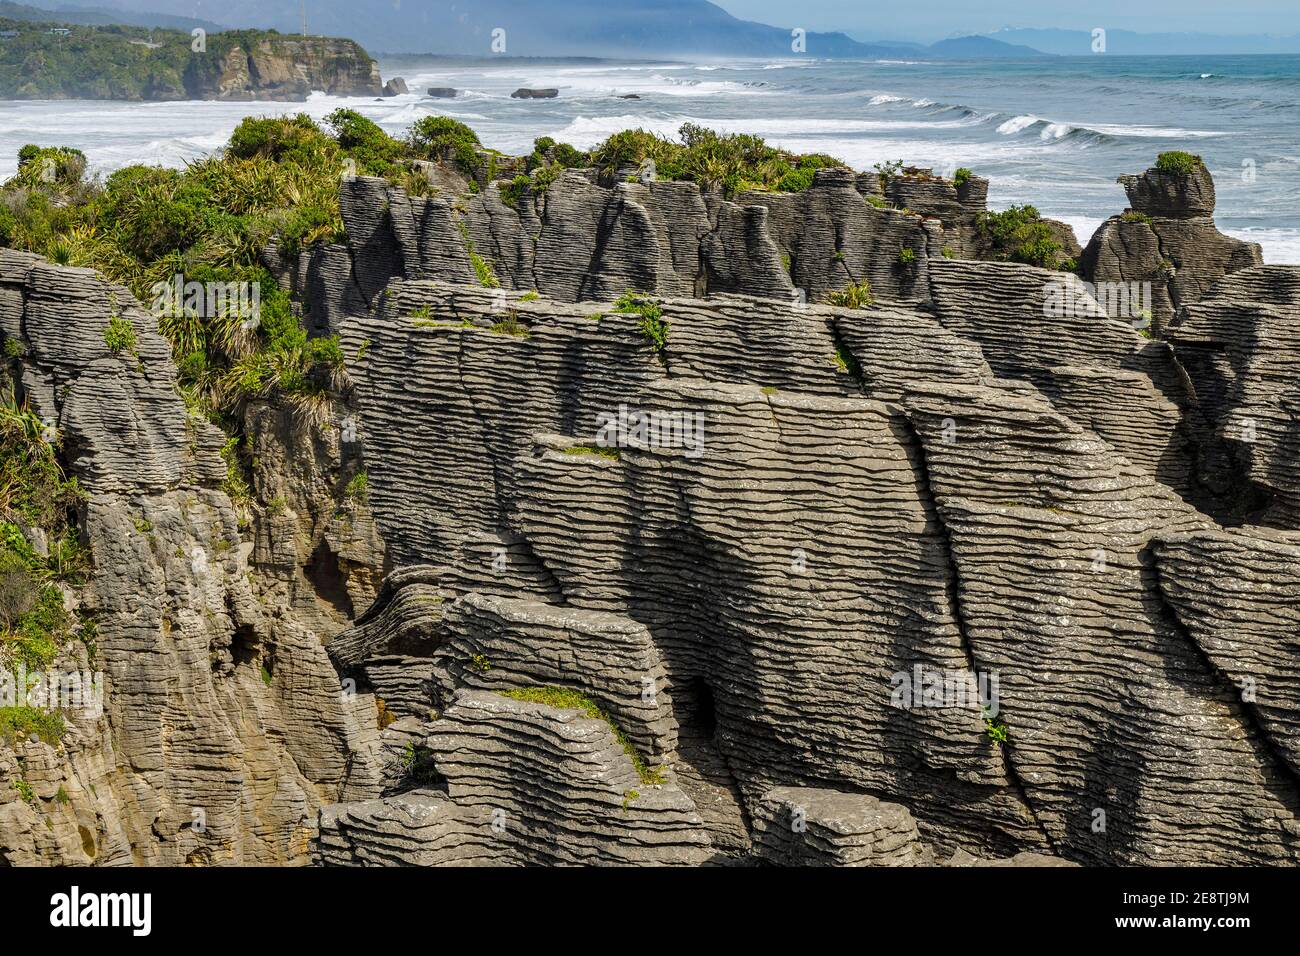 Pancake Rocks at Punakaiki, South Island, New Zealand. The heavily eroded limestone area creates the layered rock formations and blow holes. Stock Photo